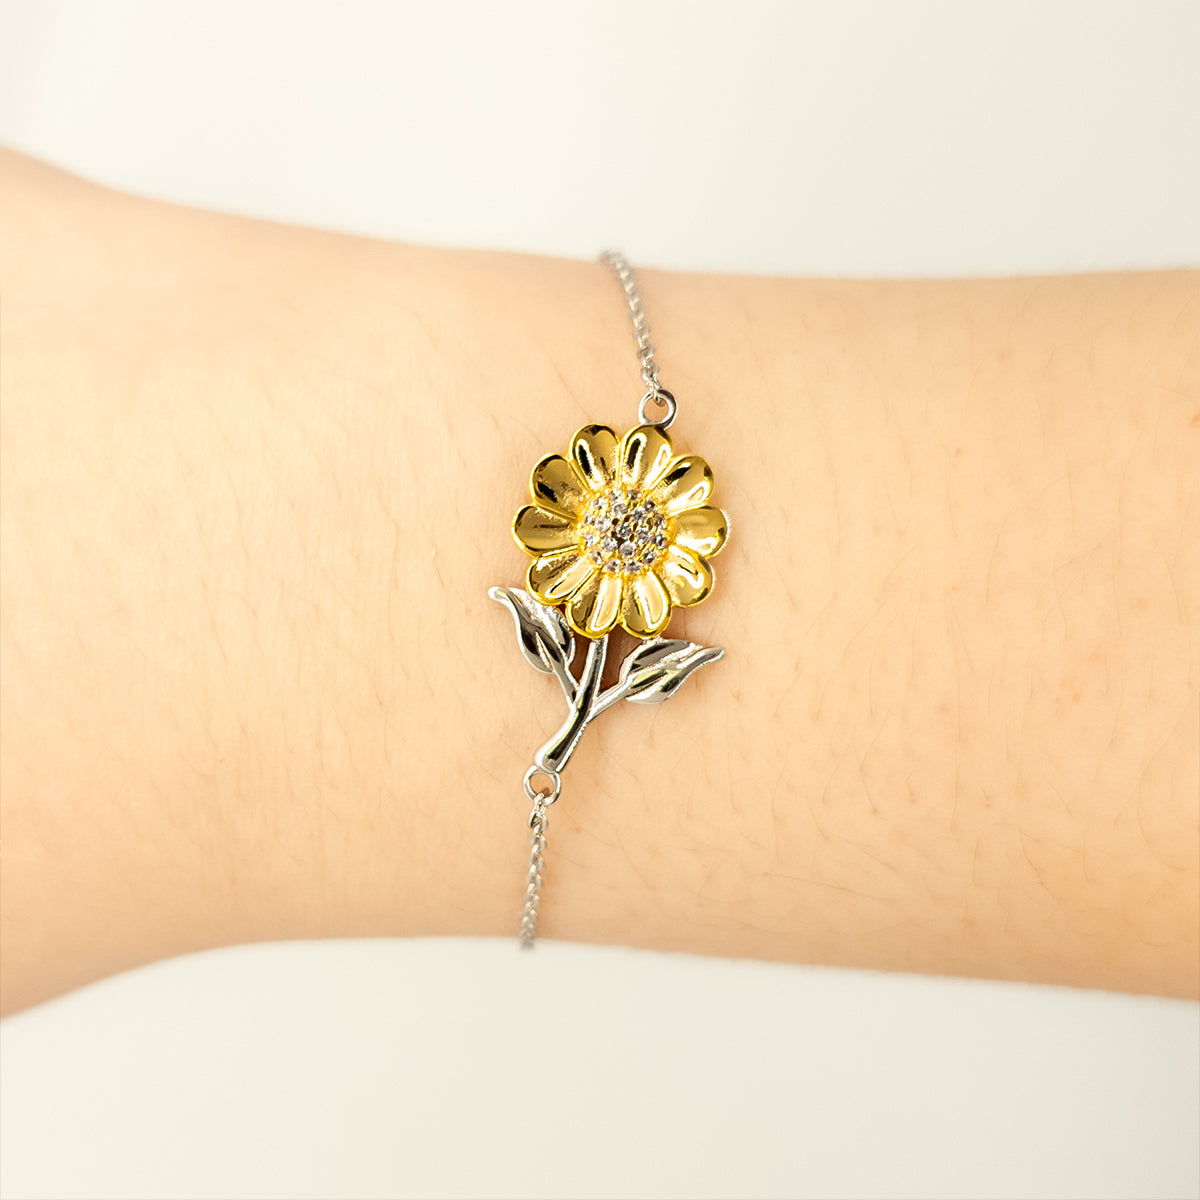 Sunflower Bracelet Mimi Youll Always Have a Special Place in My Heart Engraved Inspirational Gift for Her Birthday Holidays Veterans Day Jewelry